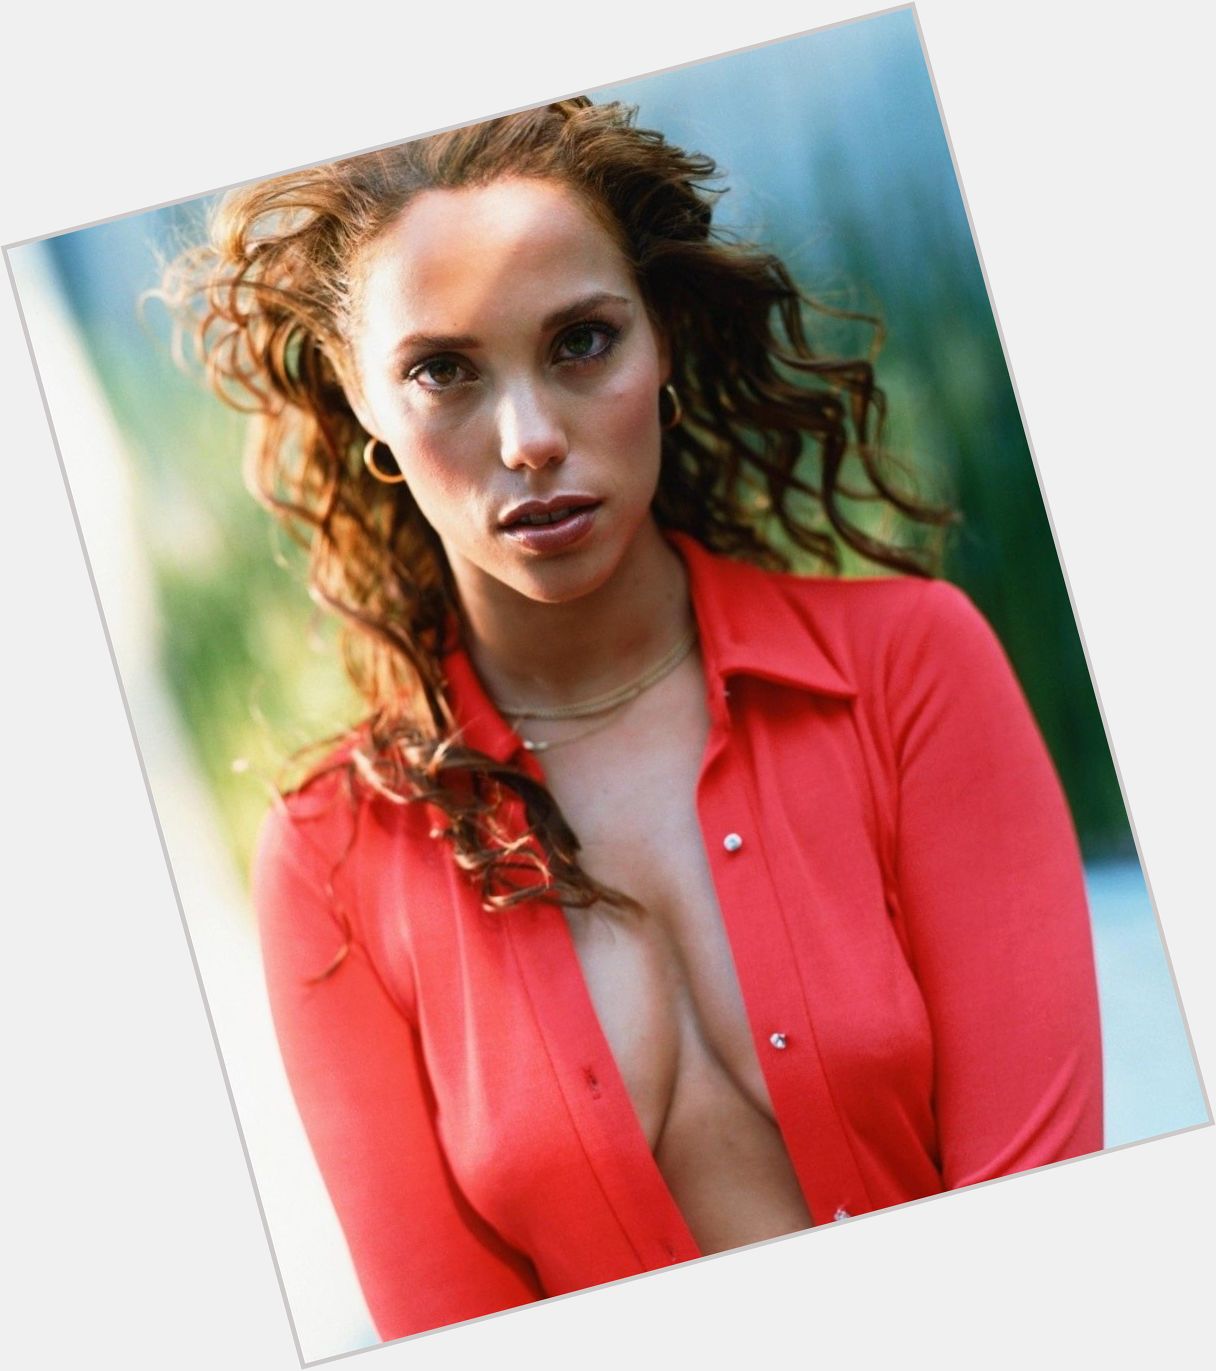 Happy 49th Birthday Shout Out to the lovely Elizabeth Berkley!! Who hasn\t seen Showgirls here?? Guilty here!! 